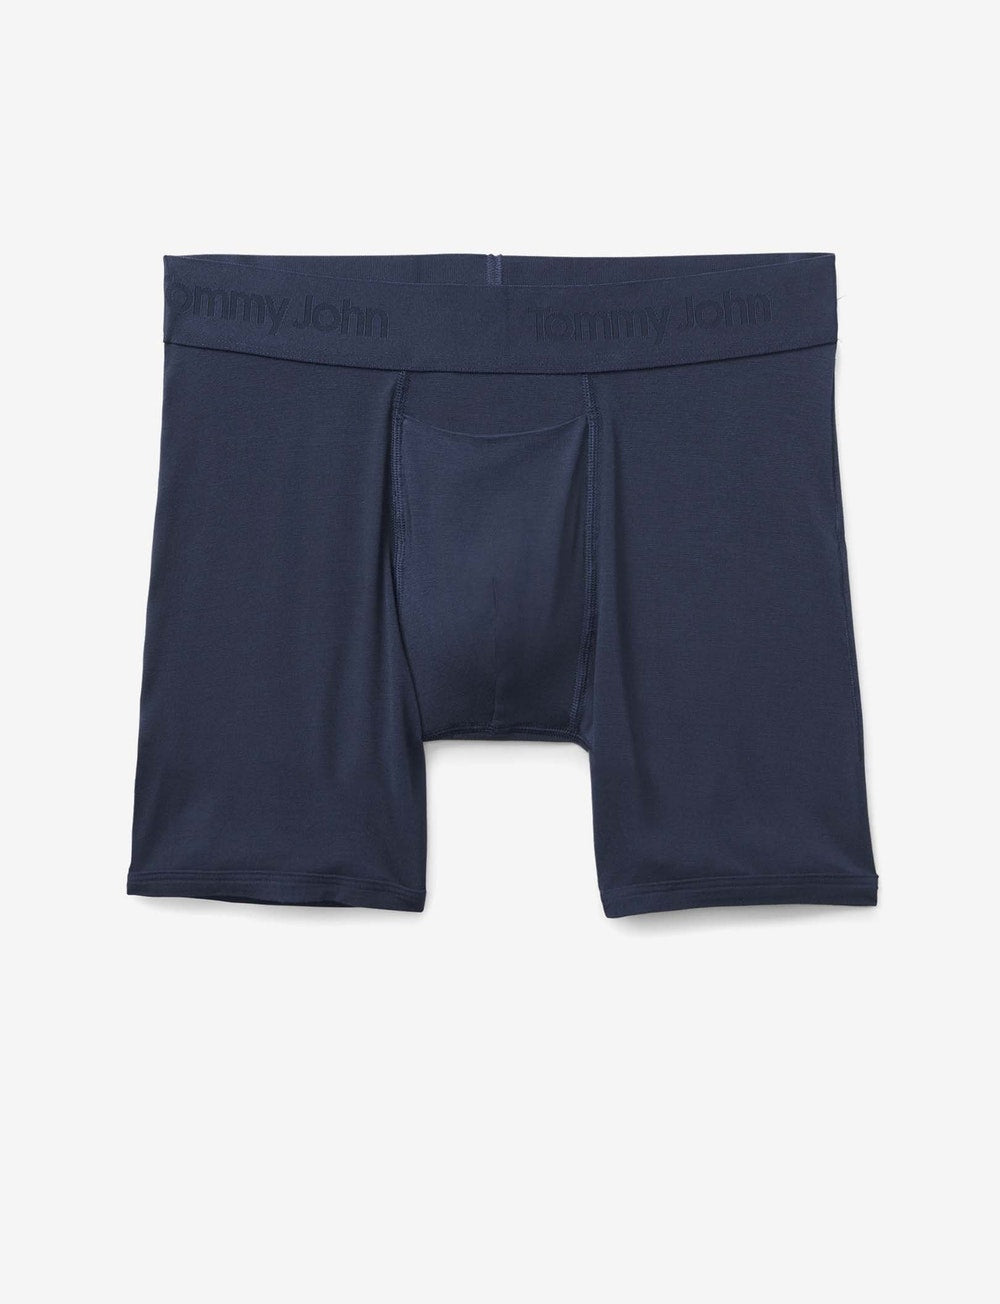 Tommy John Second Skin Mid-Length 6 Boxer Brief